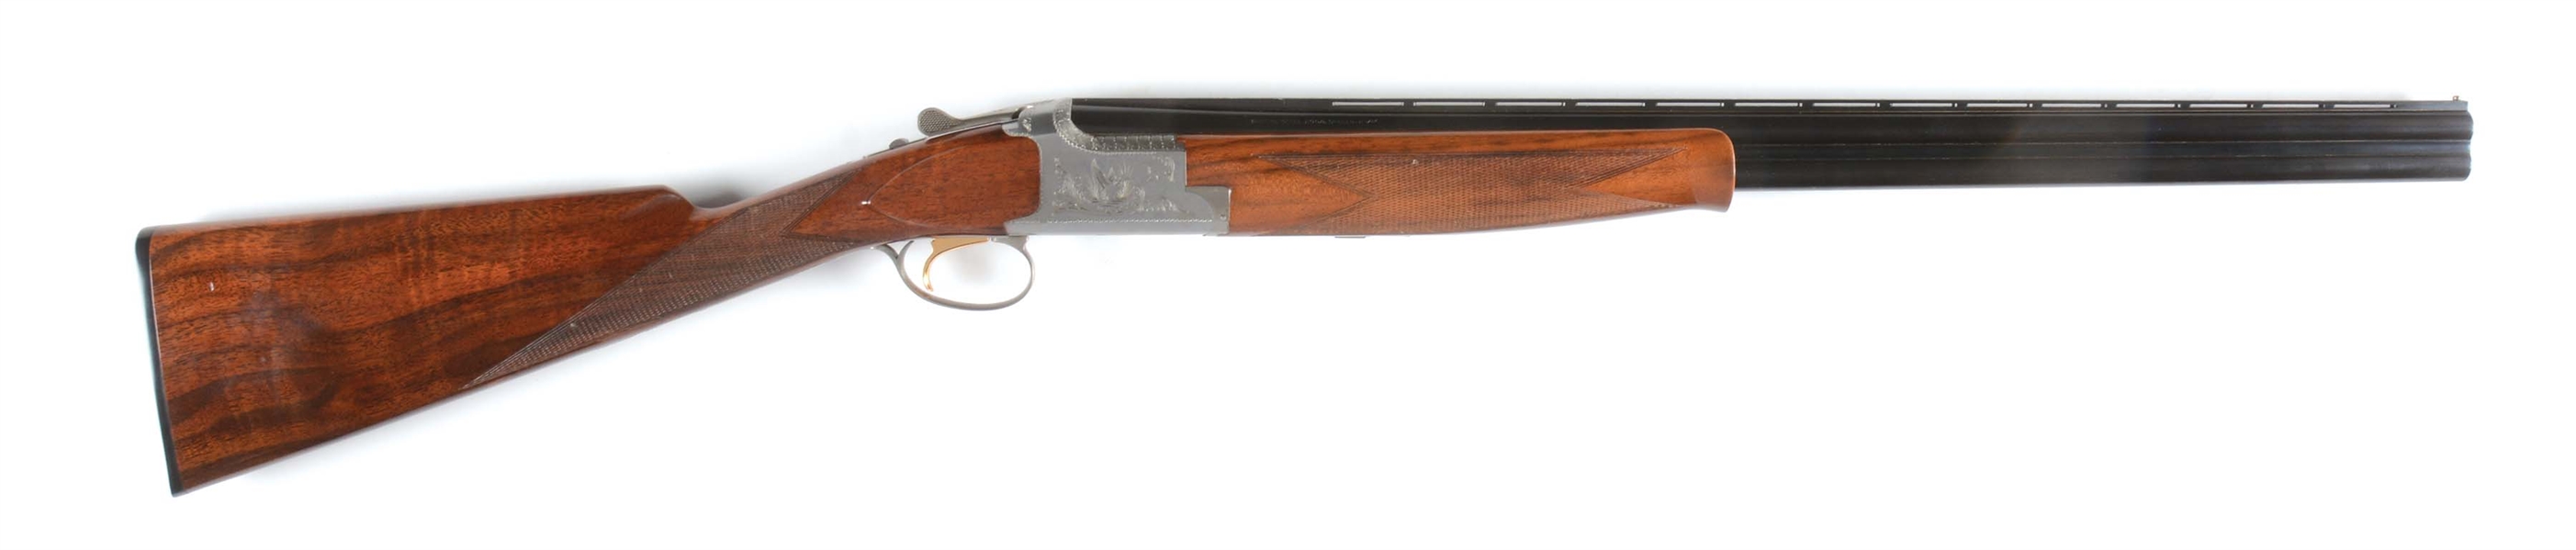 (M) BROWNING SUPERPOSED B125 20 BORE SUPERLIGHTNING OVER/UNDER SHOTGUN WITH BOX.